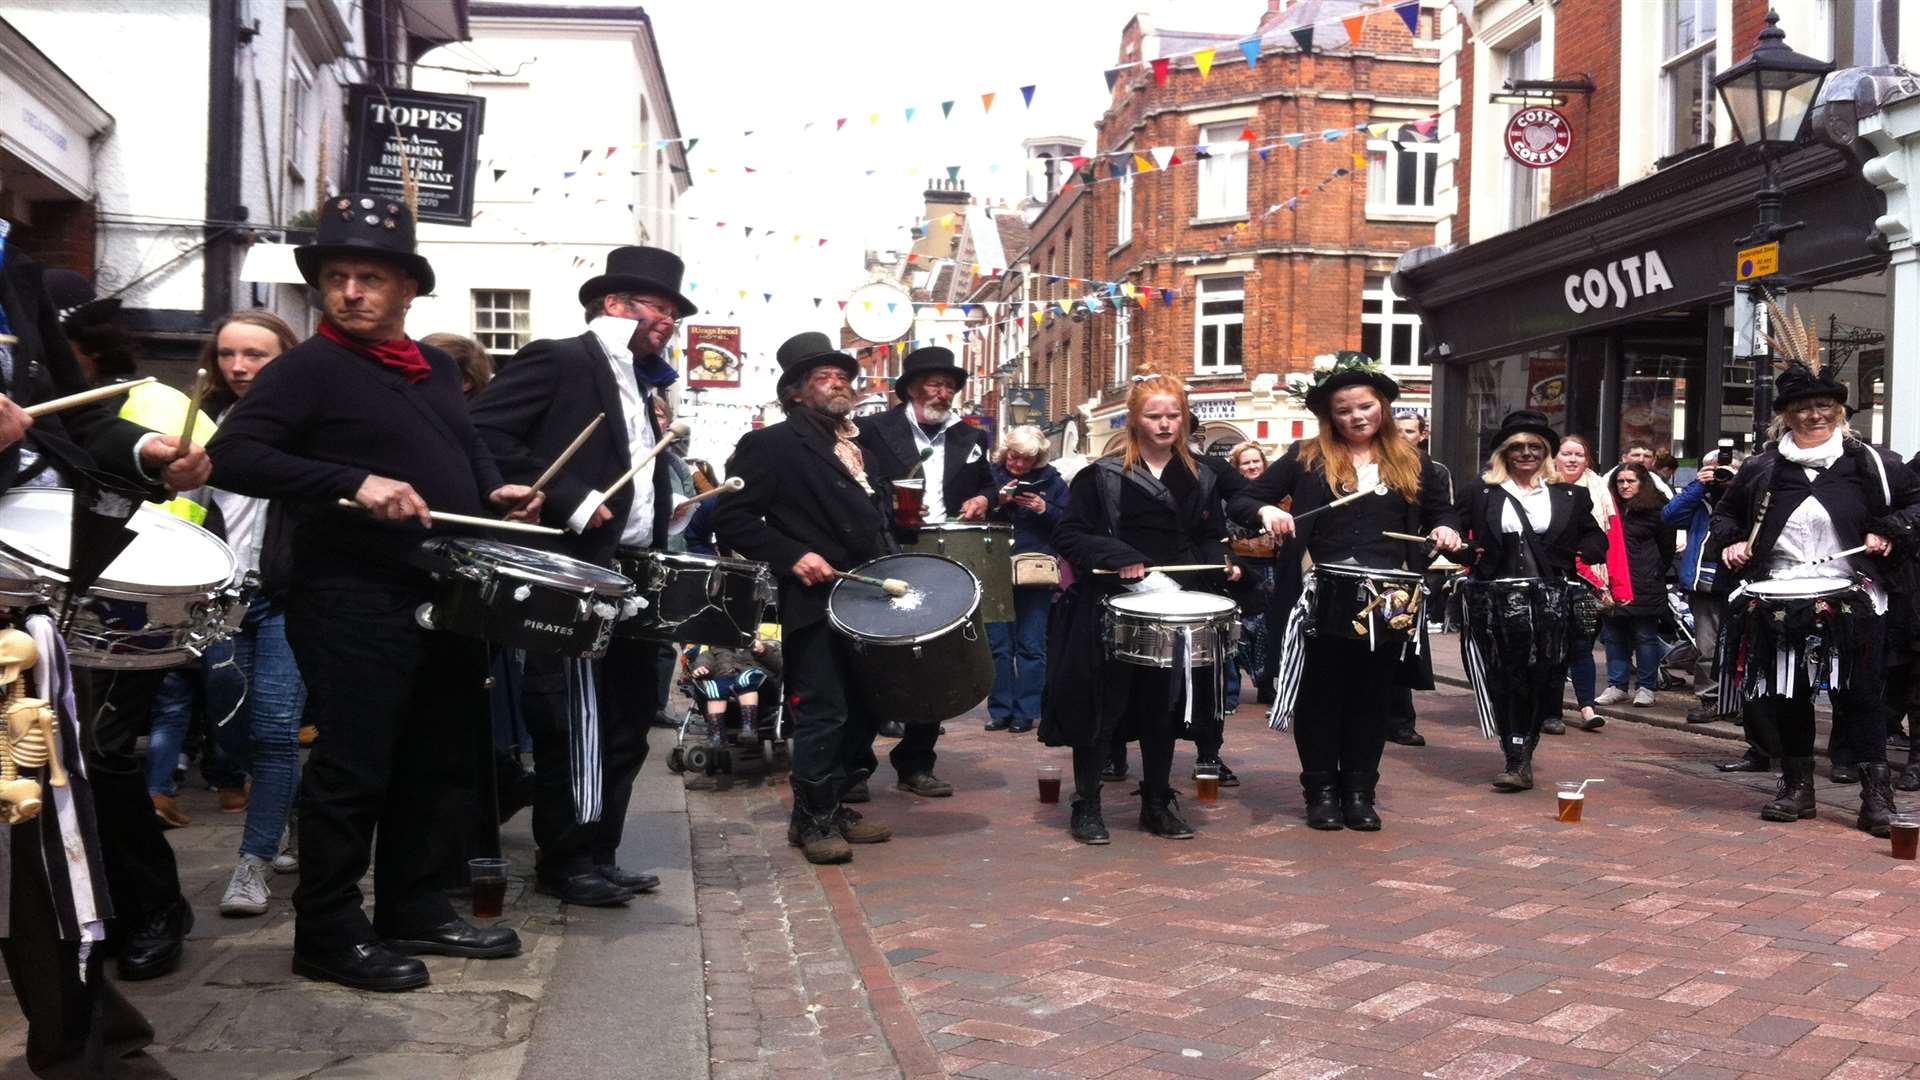 Drum Skullz Morris team entertain crowds at the Sweeps Festival in Rochester